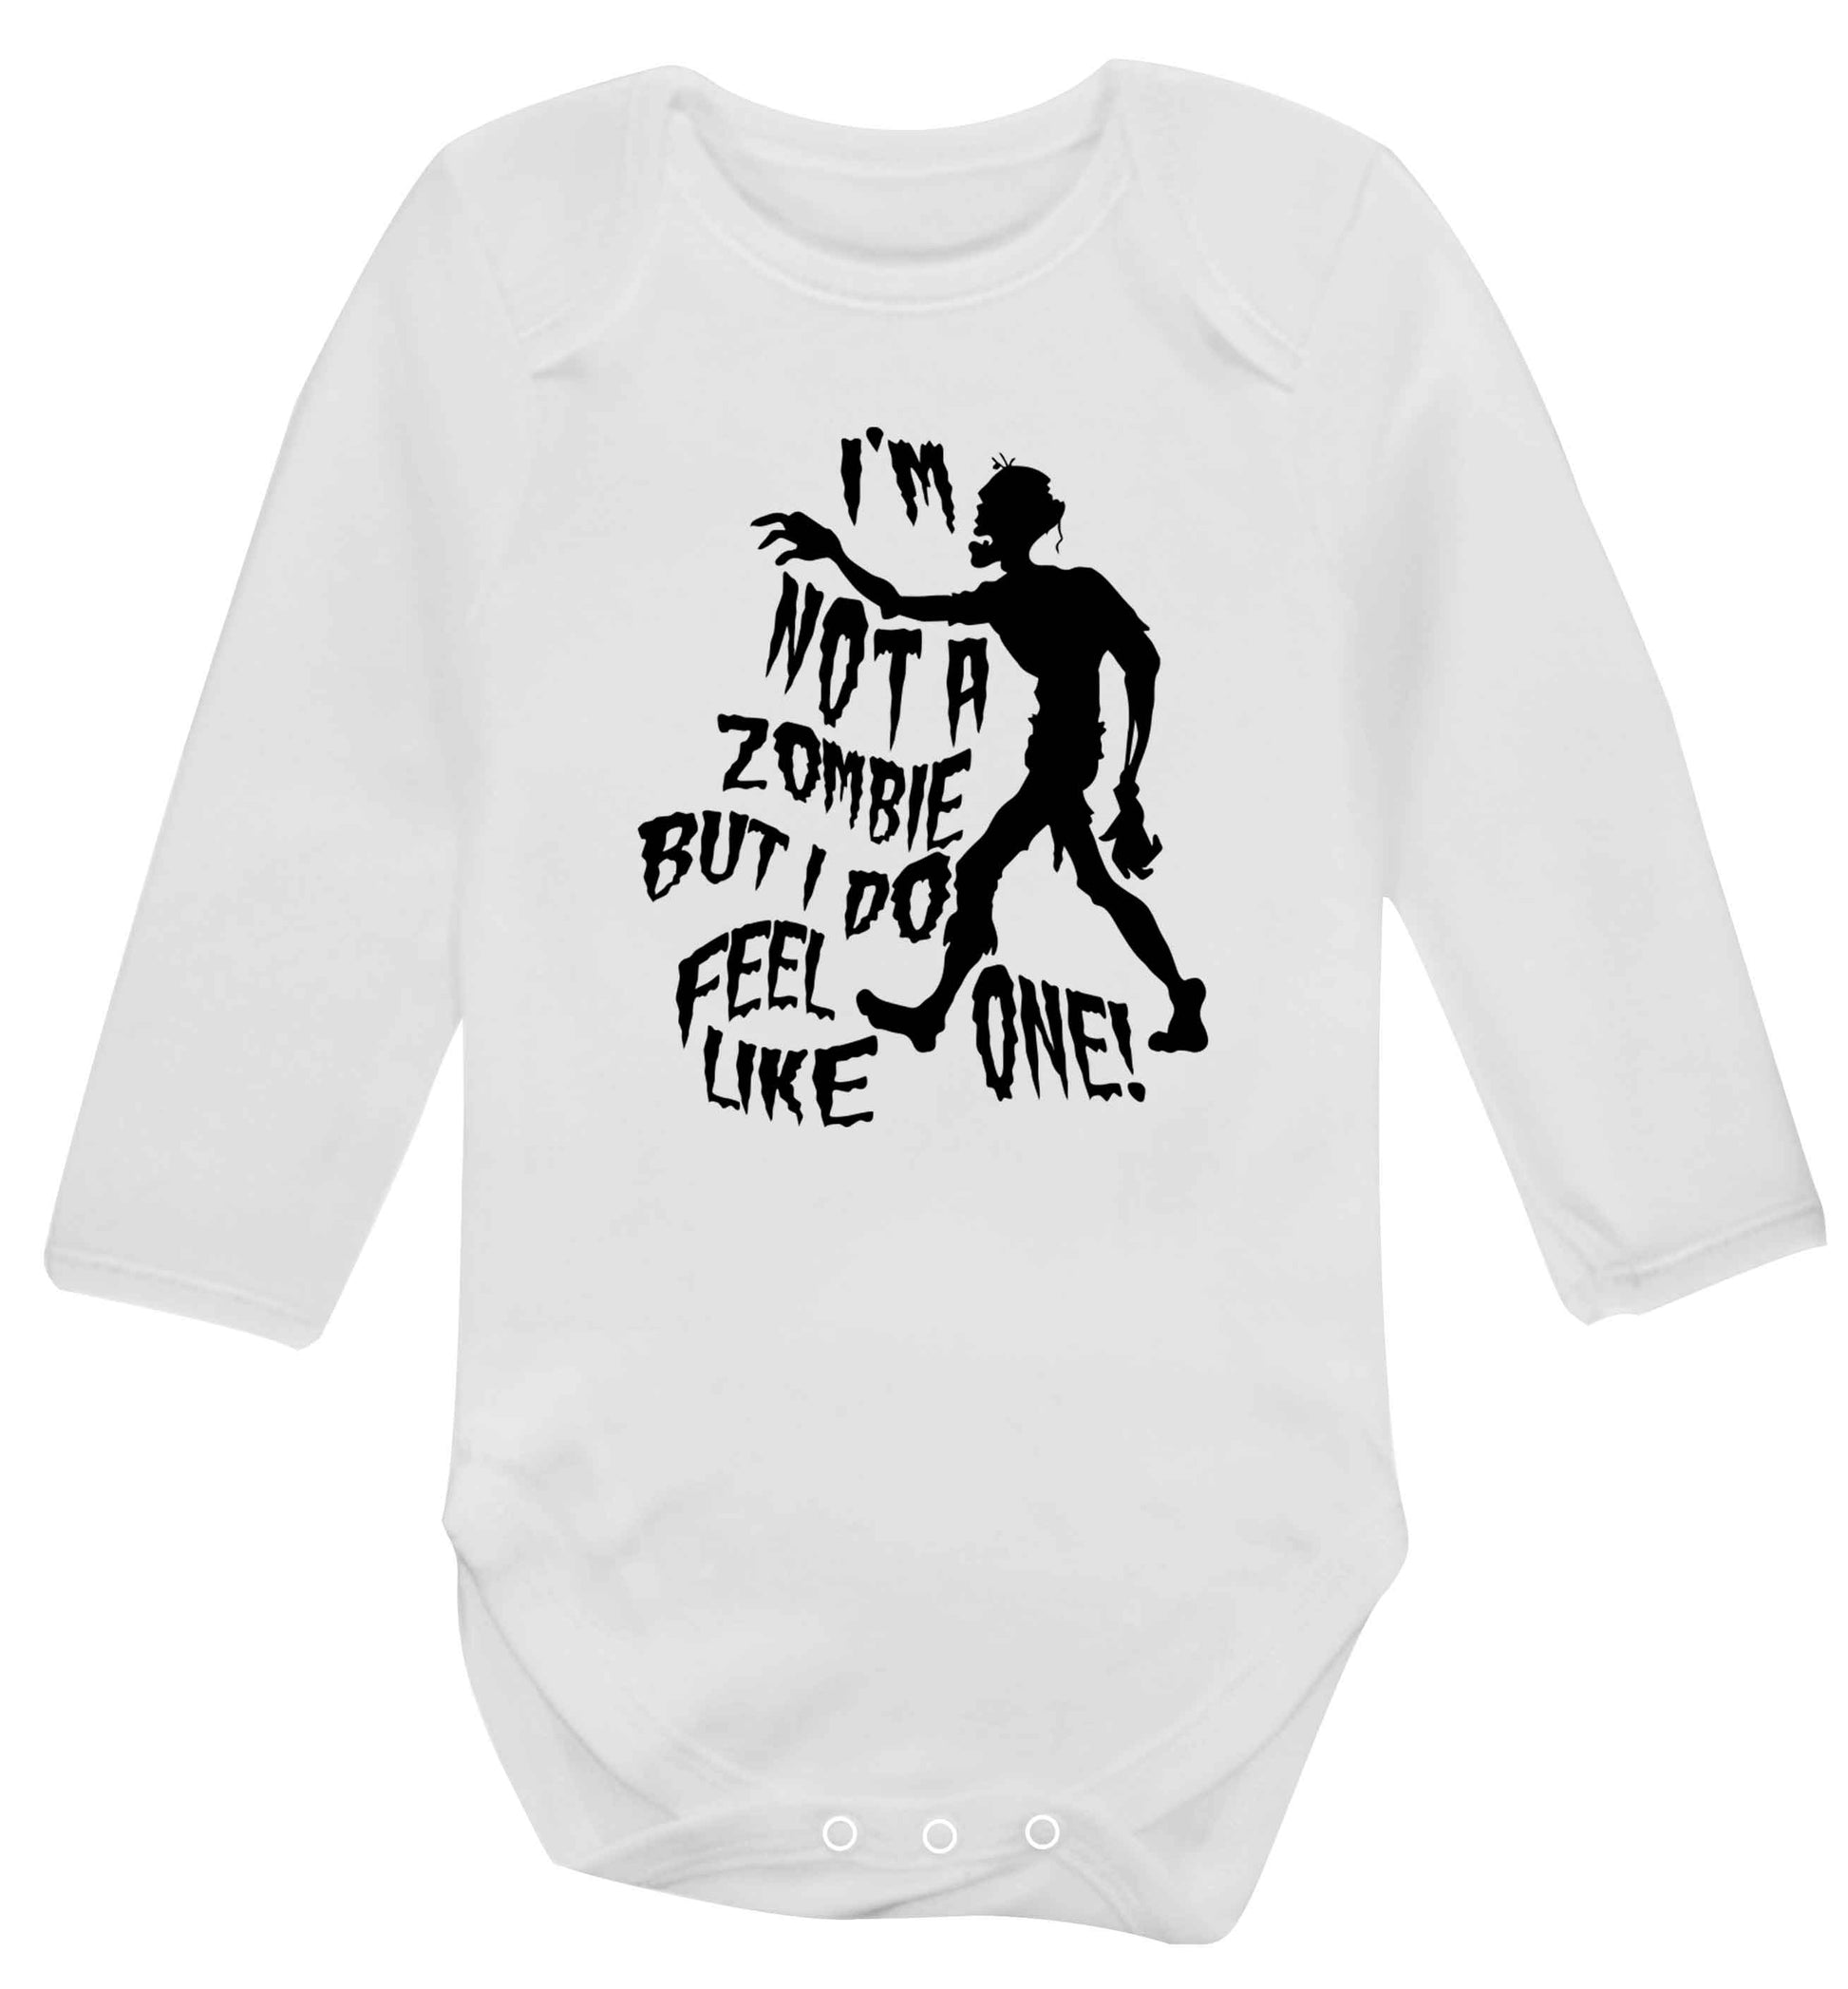 I'm not a zombie but I do feel like one! Baby Vest long sleeved white 6-12 months